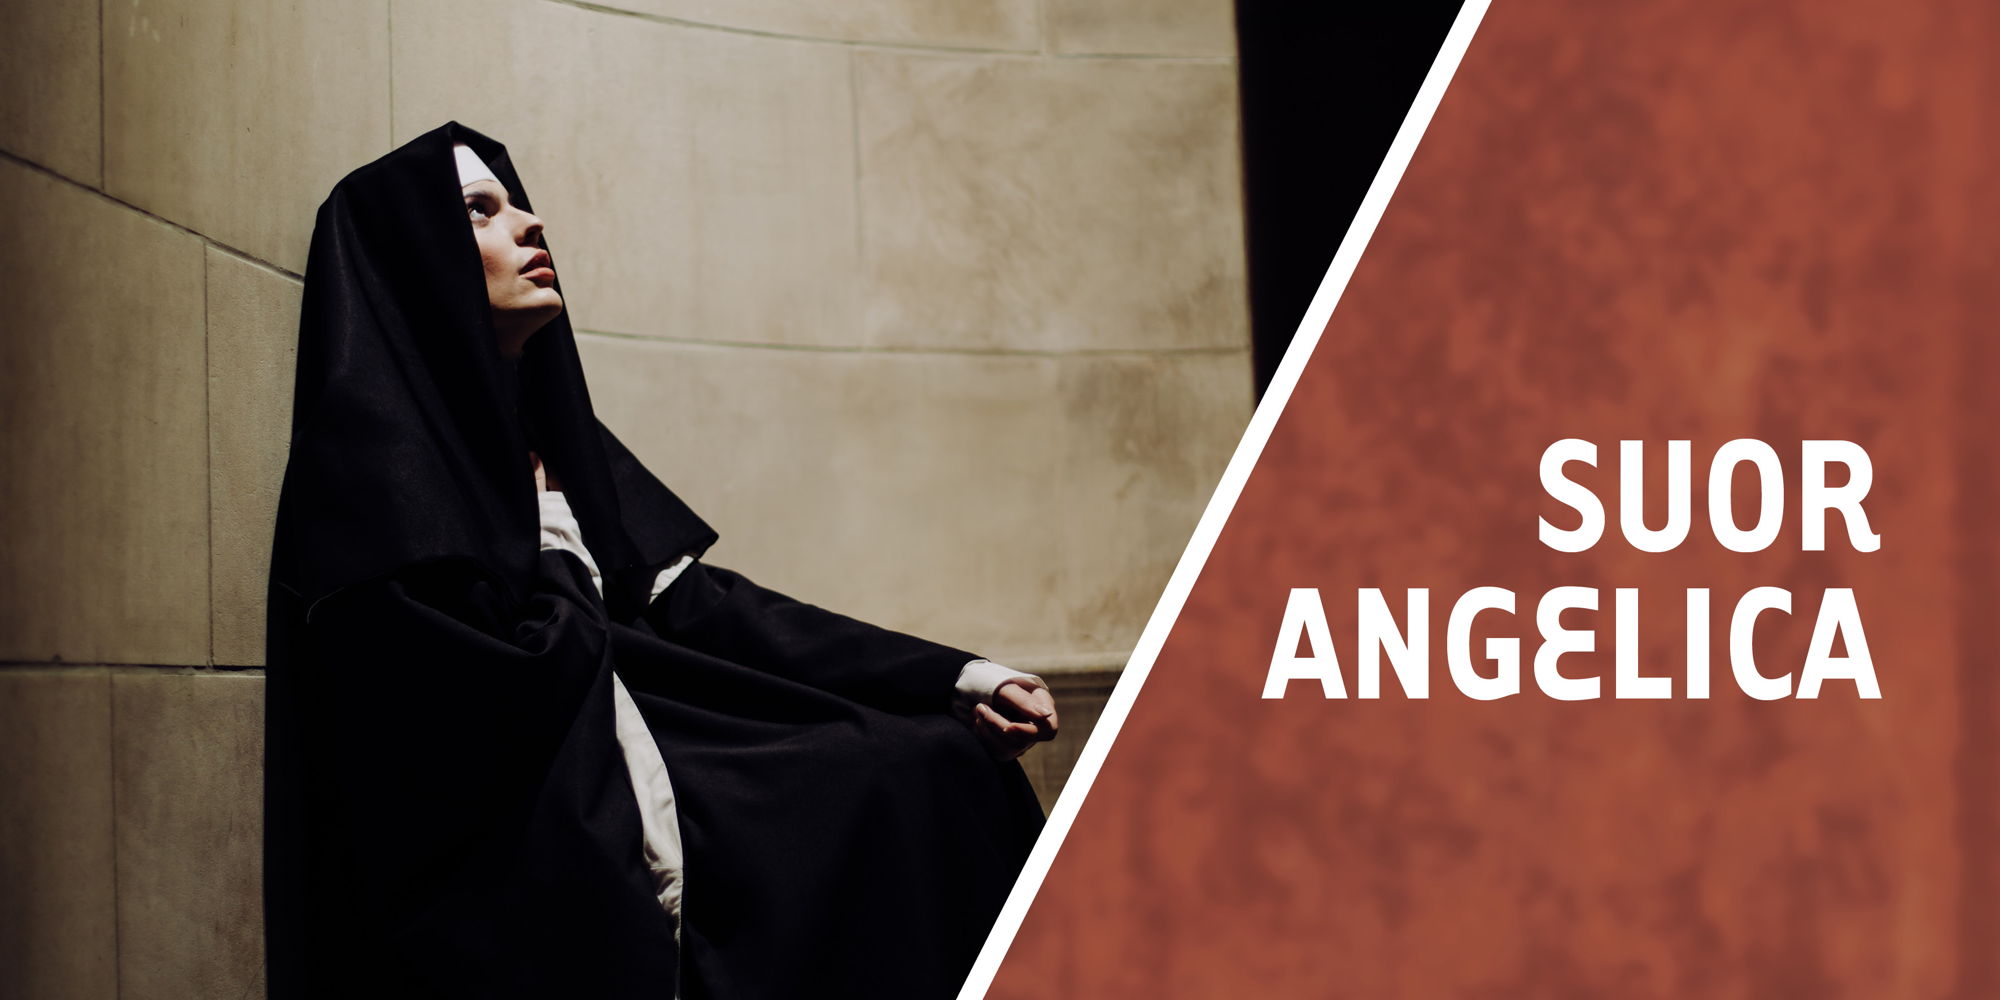 Suor Angelica promotional image